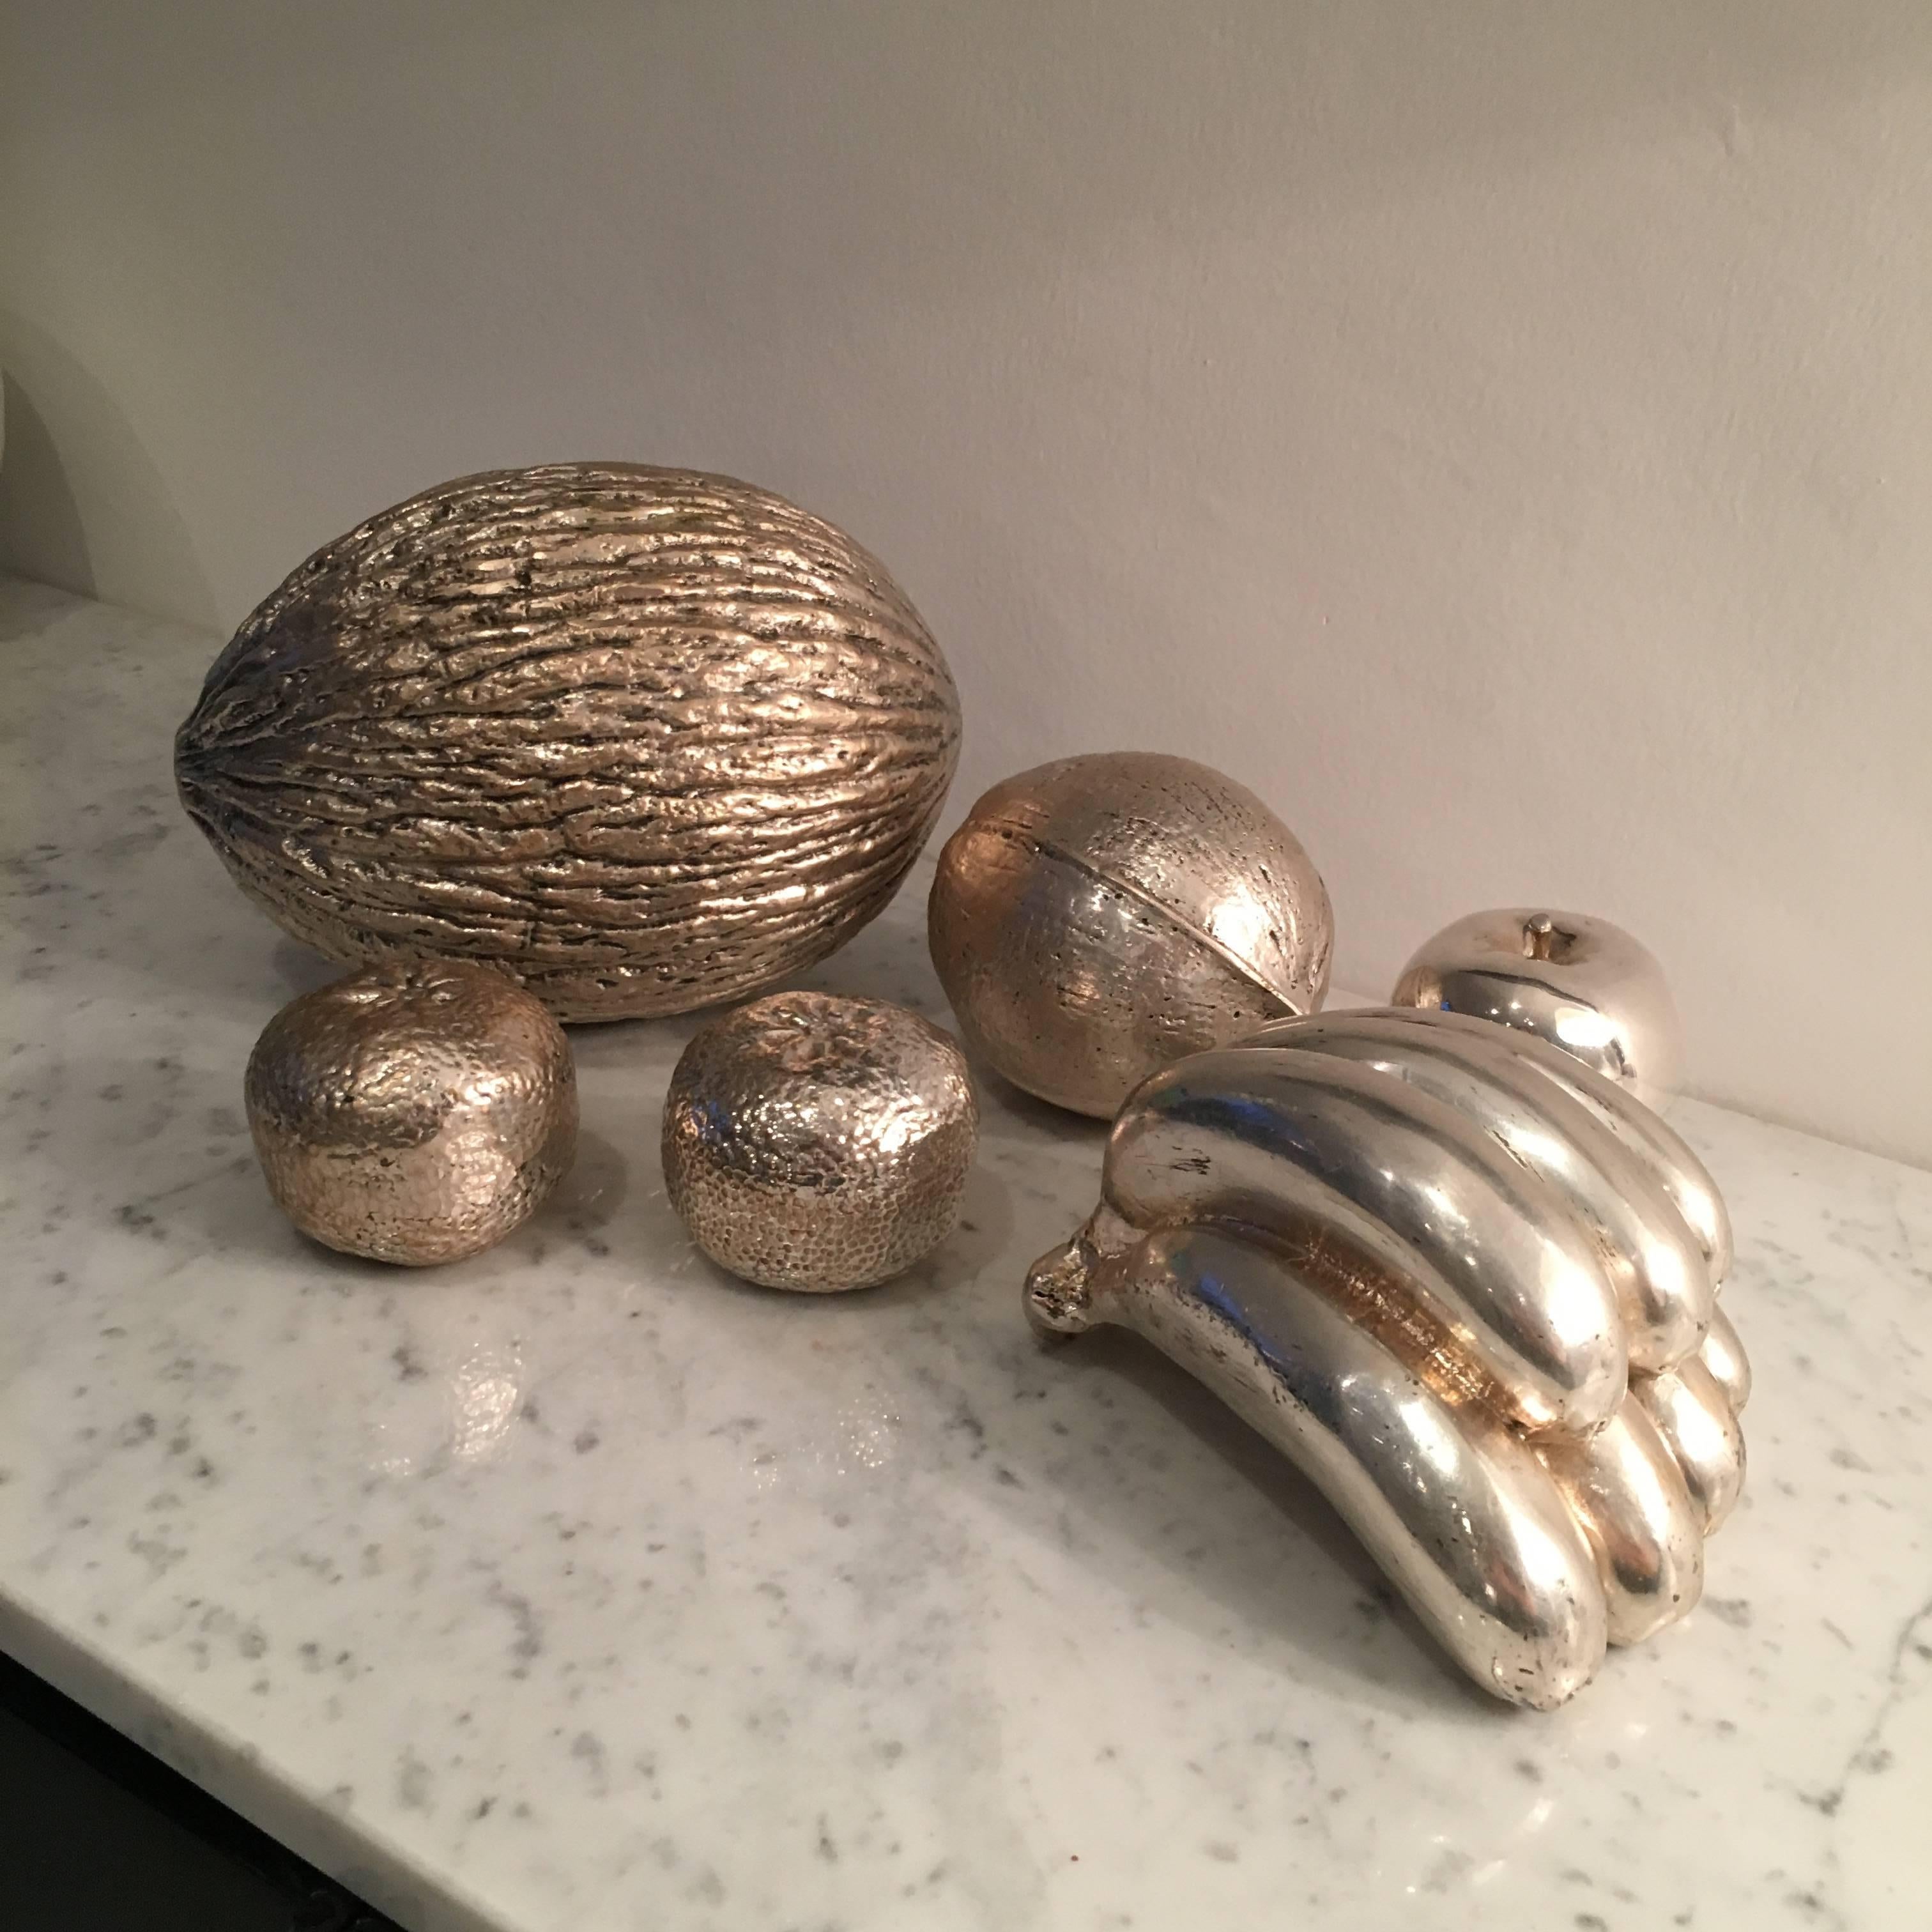 Beautiful and decorative set of stylized fruits in silvered metal.
Six Pieces, Italy, circa 1950.

Dimensions:
Orange Height 6.5cm X diameter 8cm
Coconut Height 14cm X diameter 11cm
Banana Height 10cm X length 17cm X depth 14cm
Yellow melon